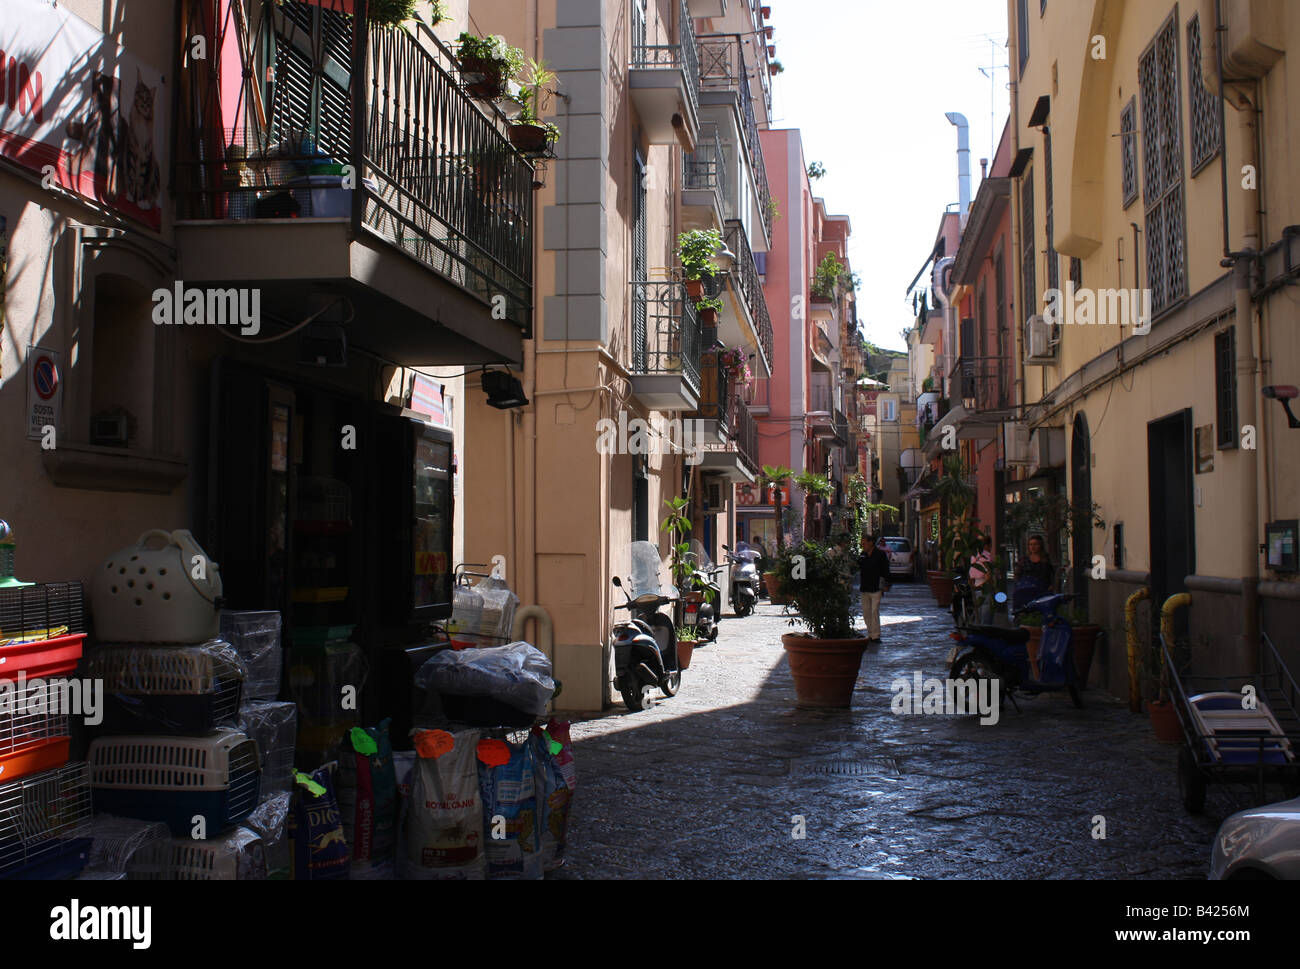 A street in Pozzuoli in southern Italy. Stock Photo